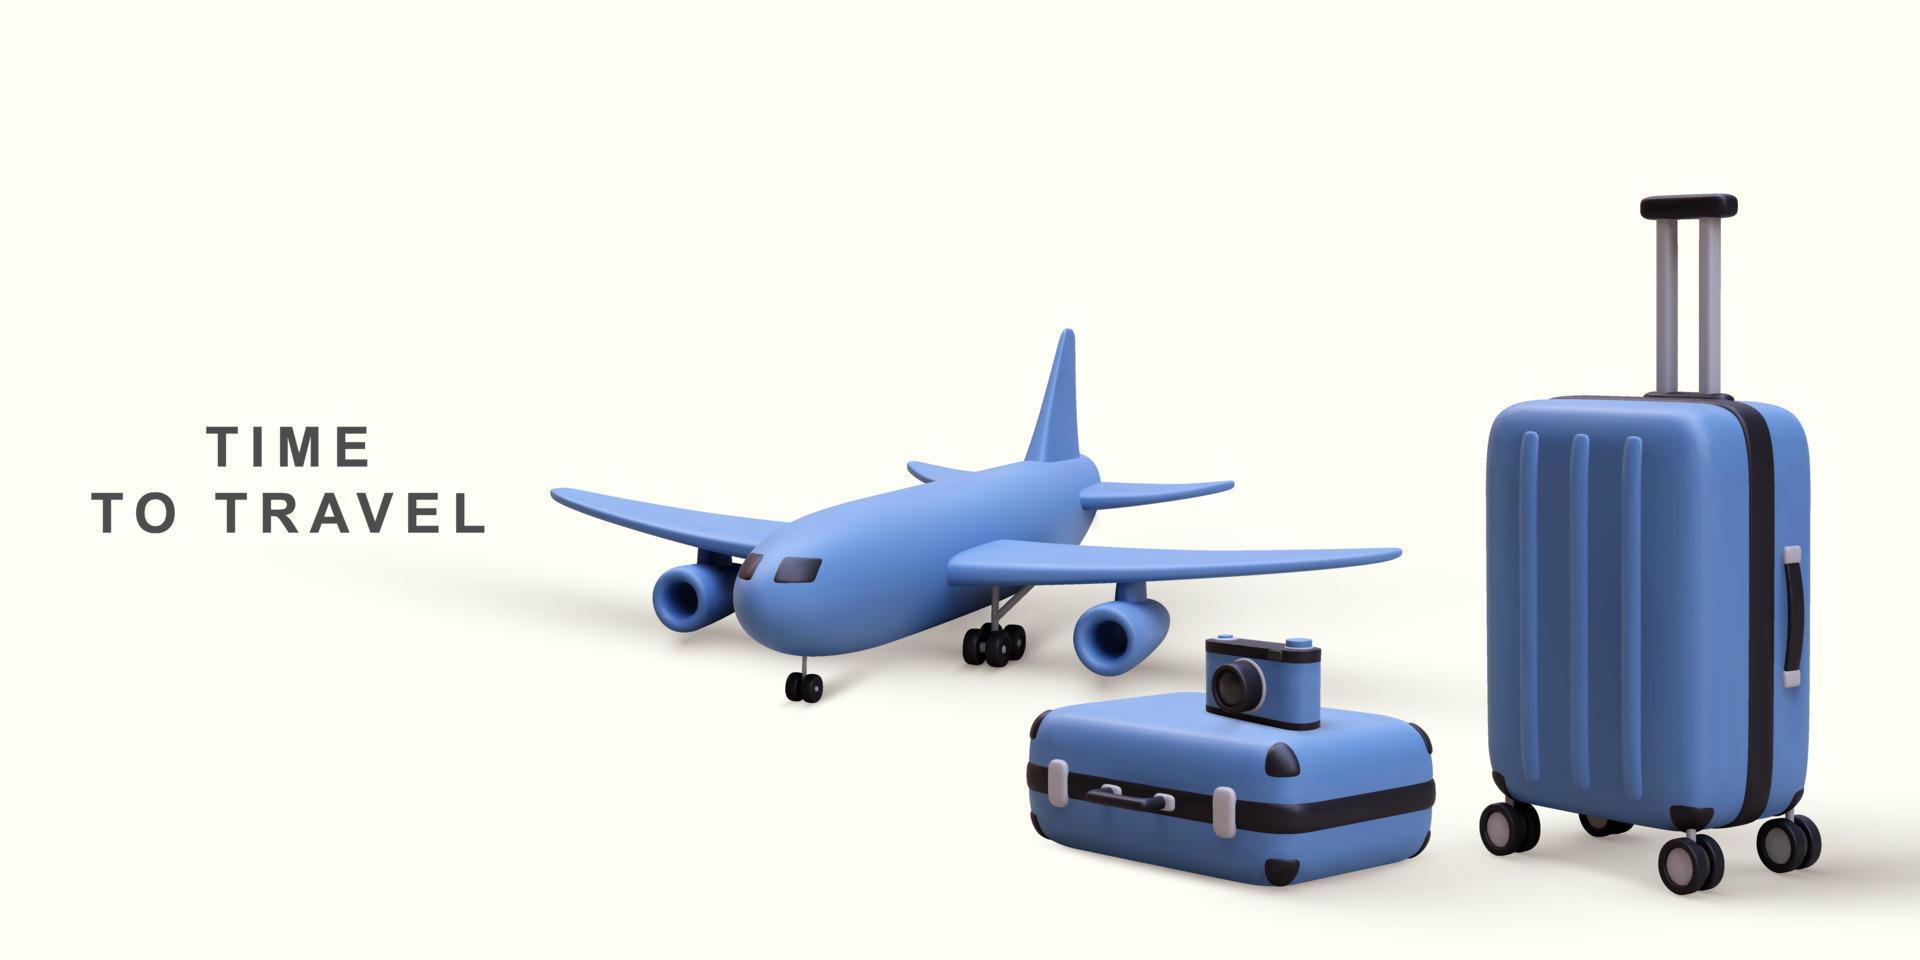 3d realistic uggages, camera and plane. Vector illustration.